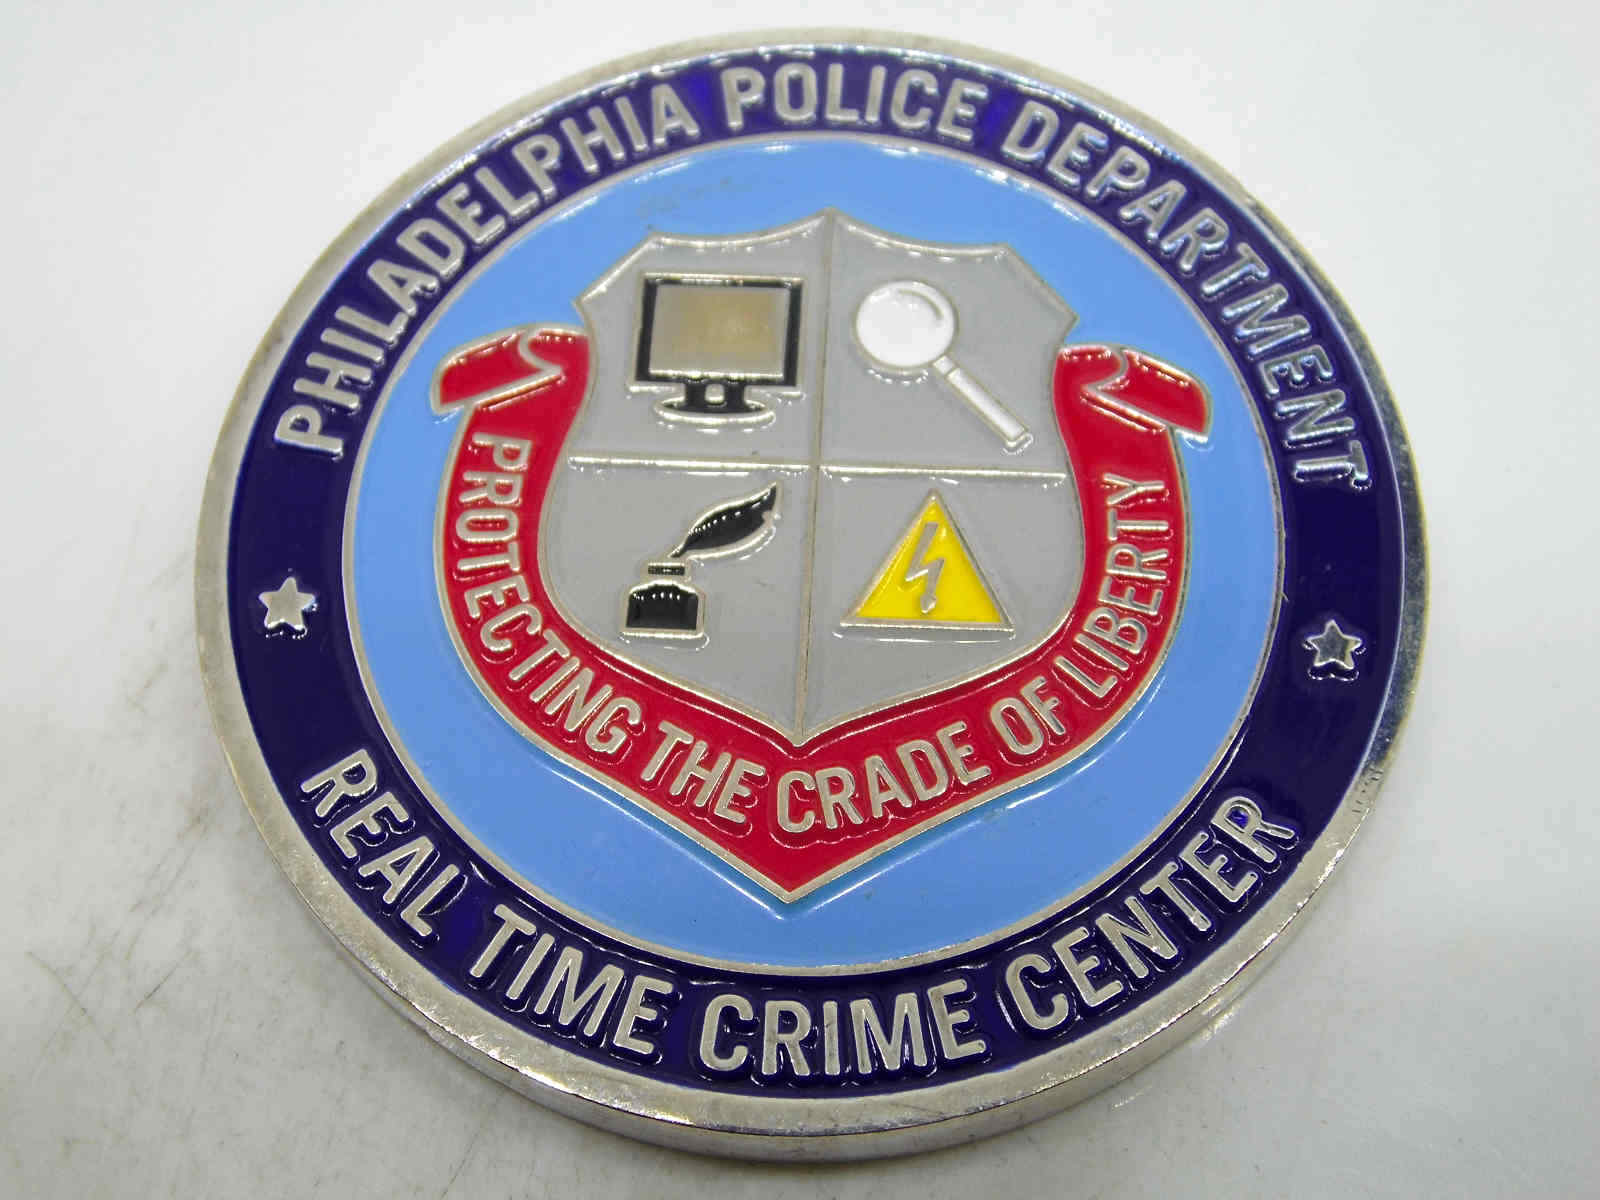 PHILADELPHIA POLICE DEPARTMENT REAL TIME CRIME CENTER CHALLENGE COIN